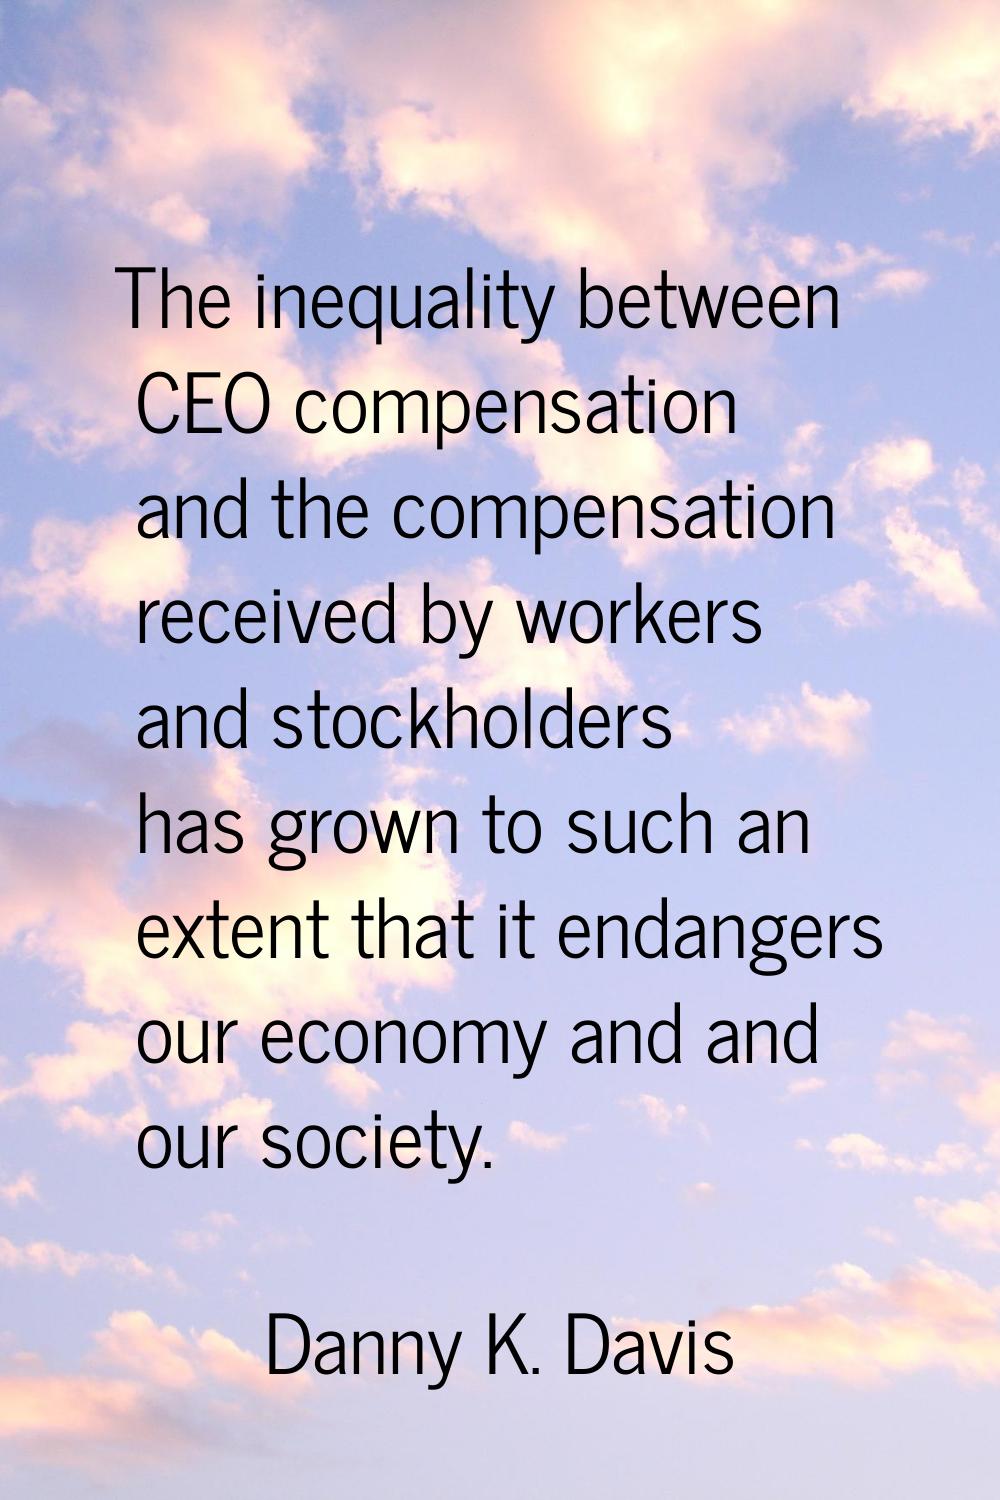 The inequality between CEO compensation and the compensation received by workers and stockholders h